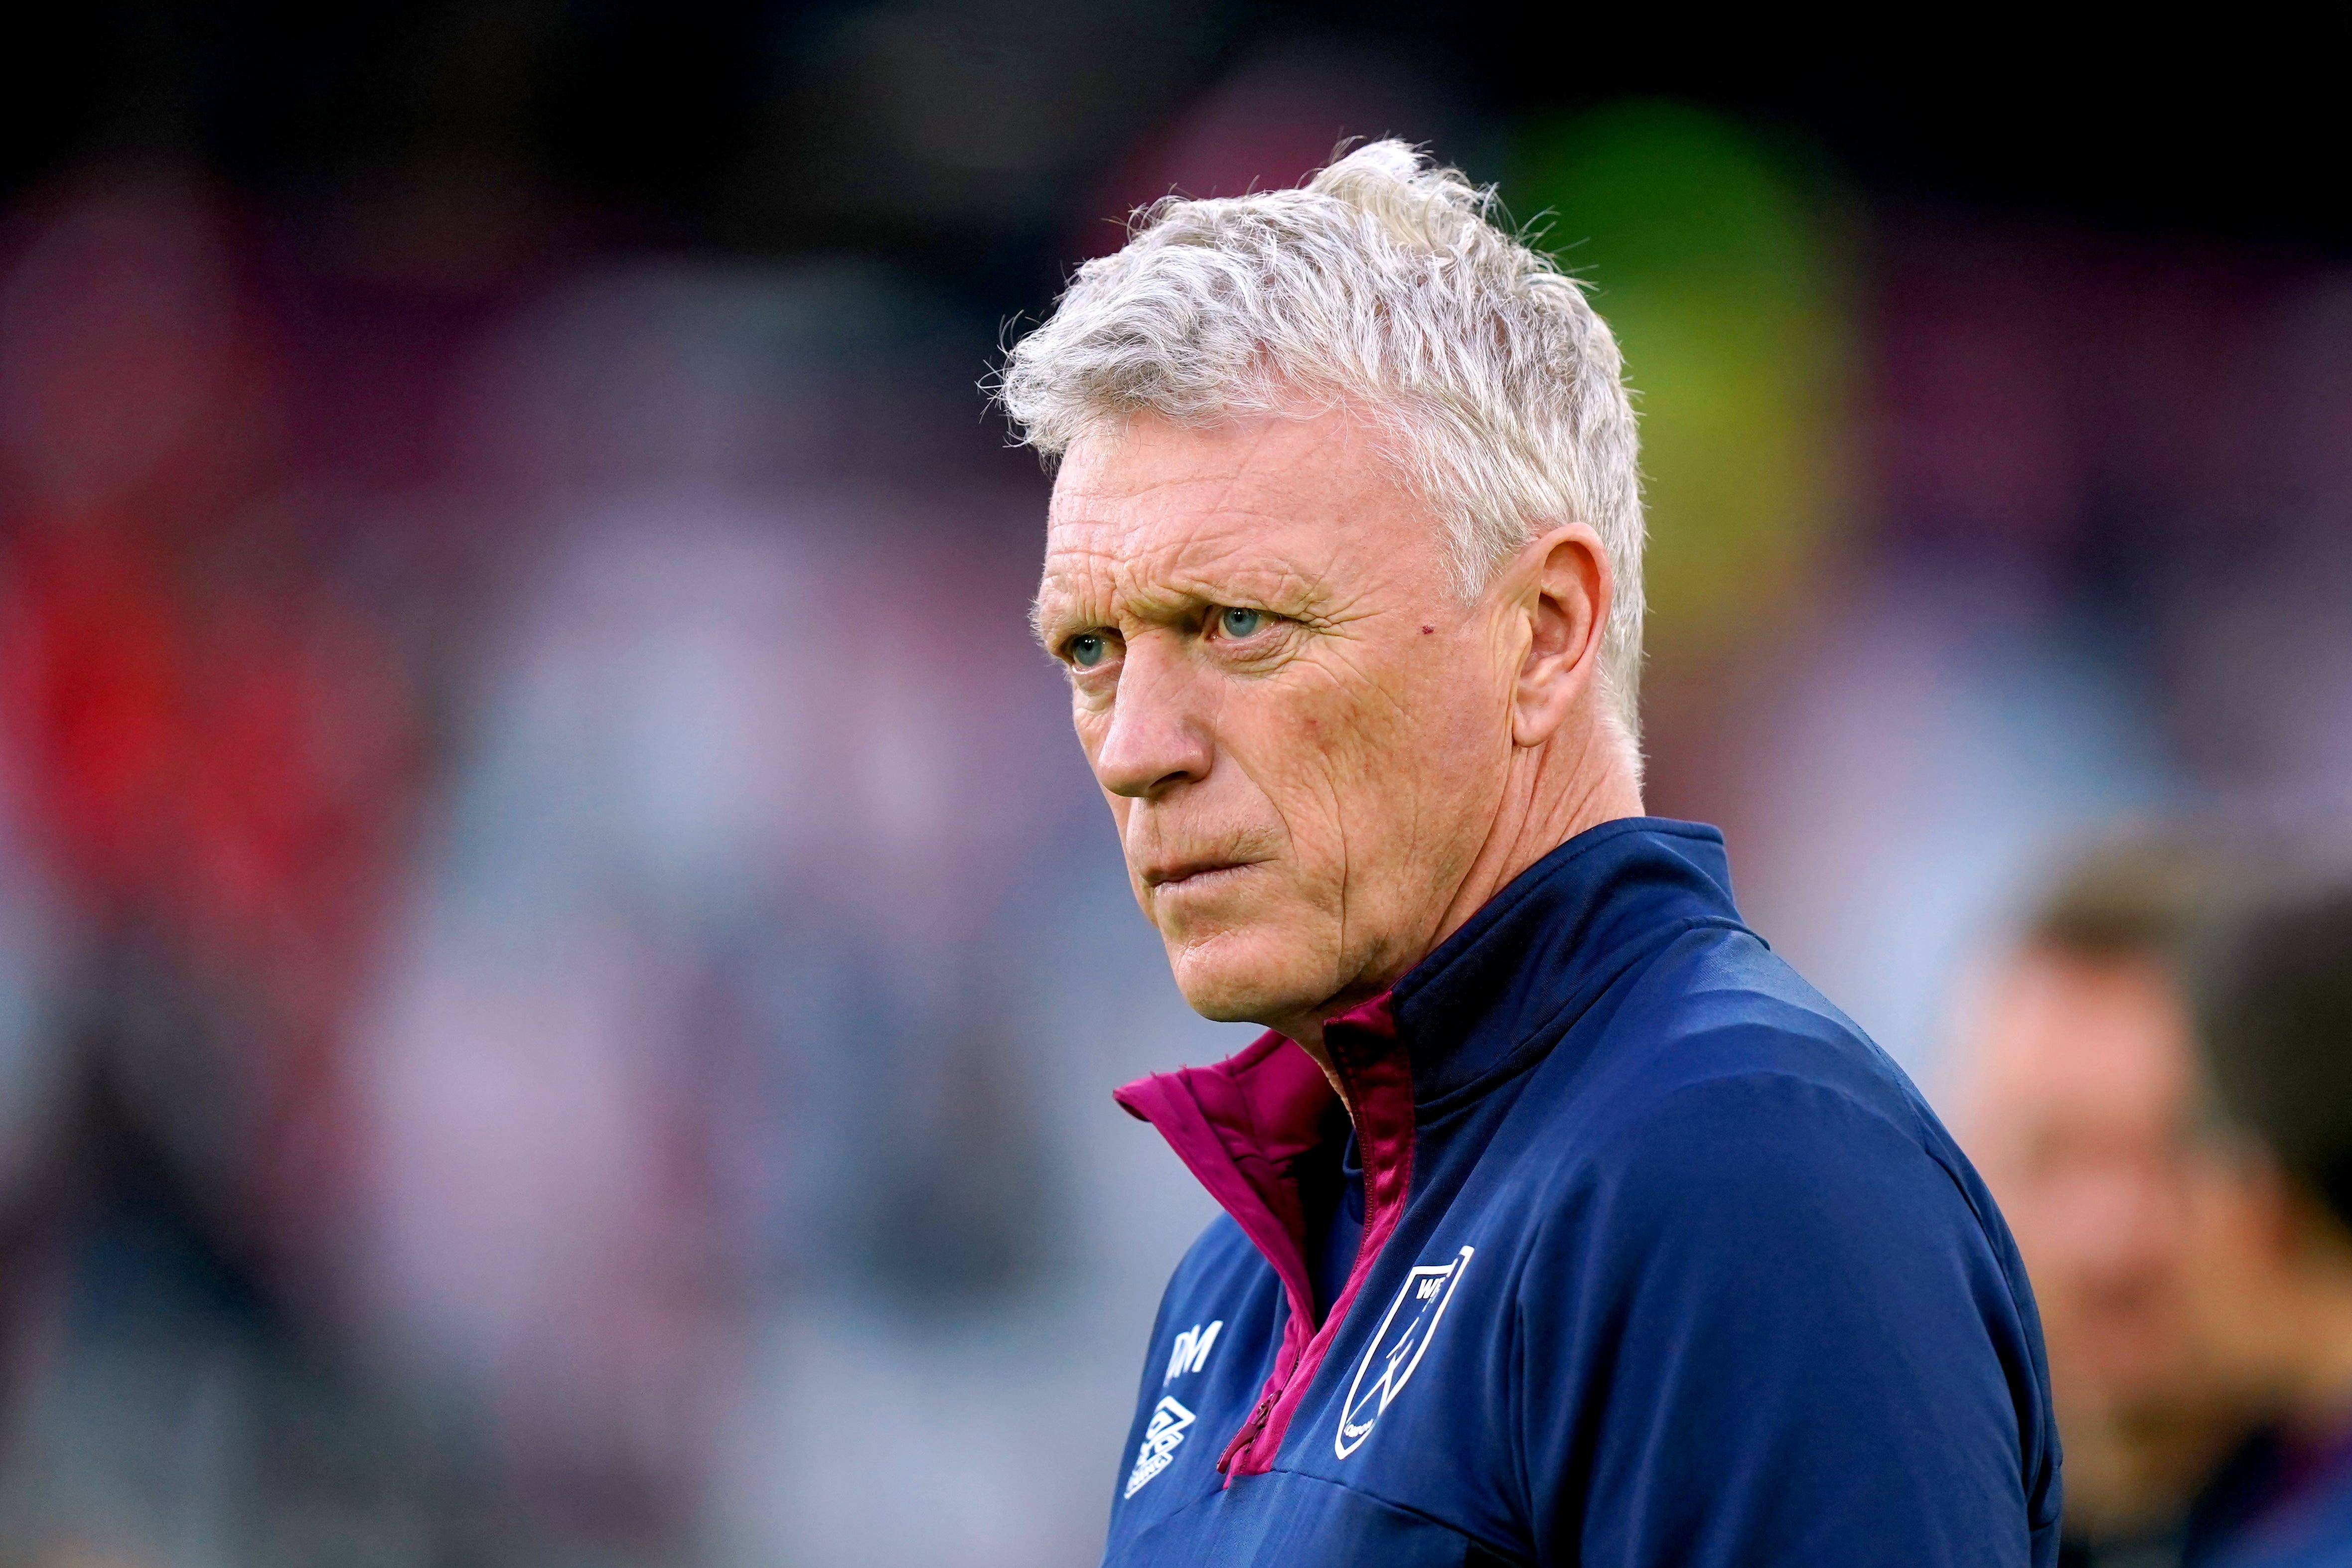 West Ham boss David Moyes questions strange VAR decision to rule out goal The Independent